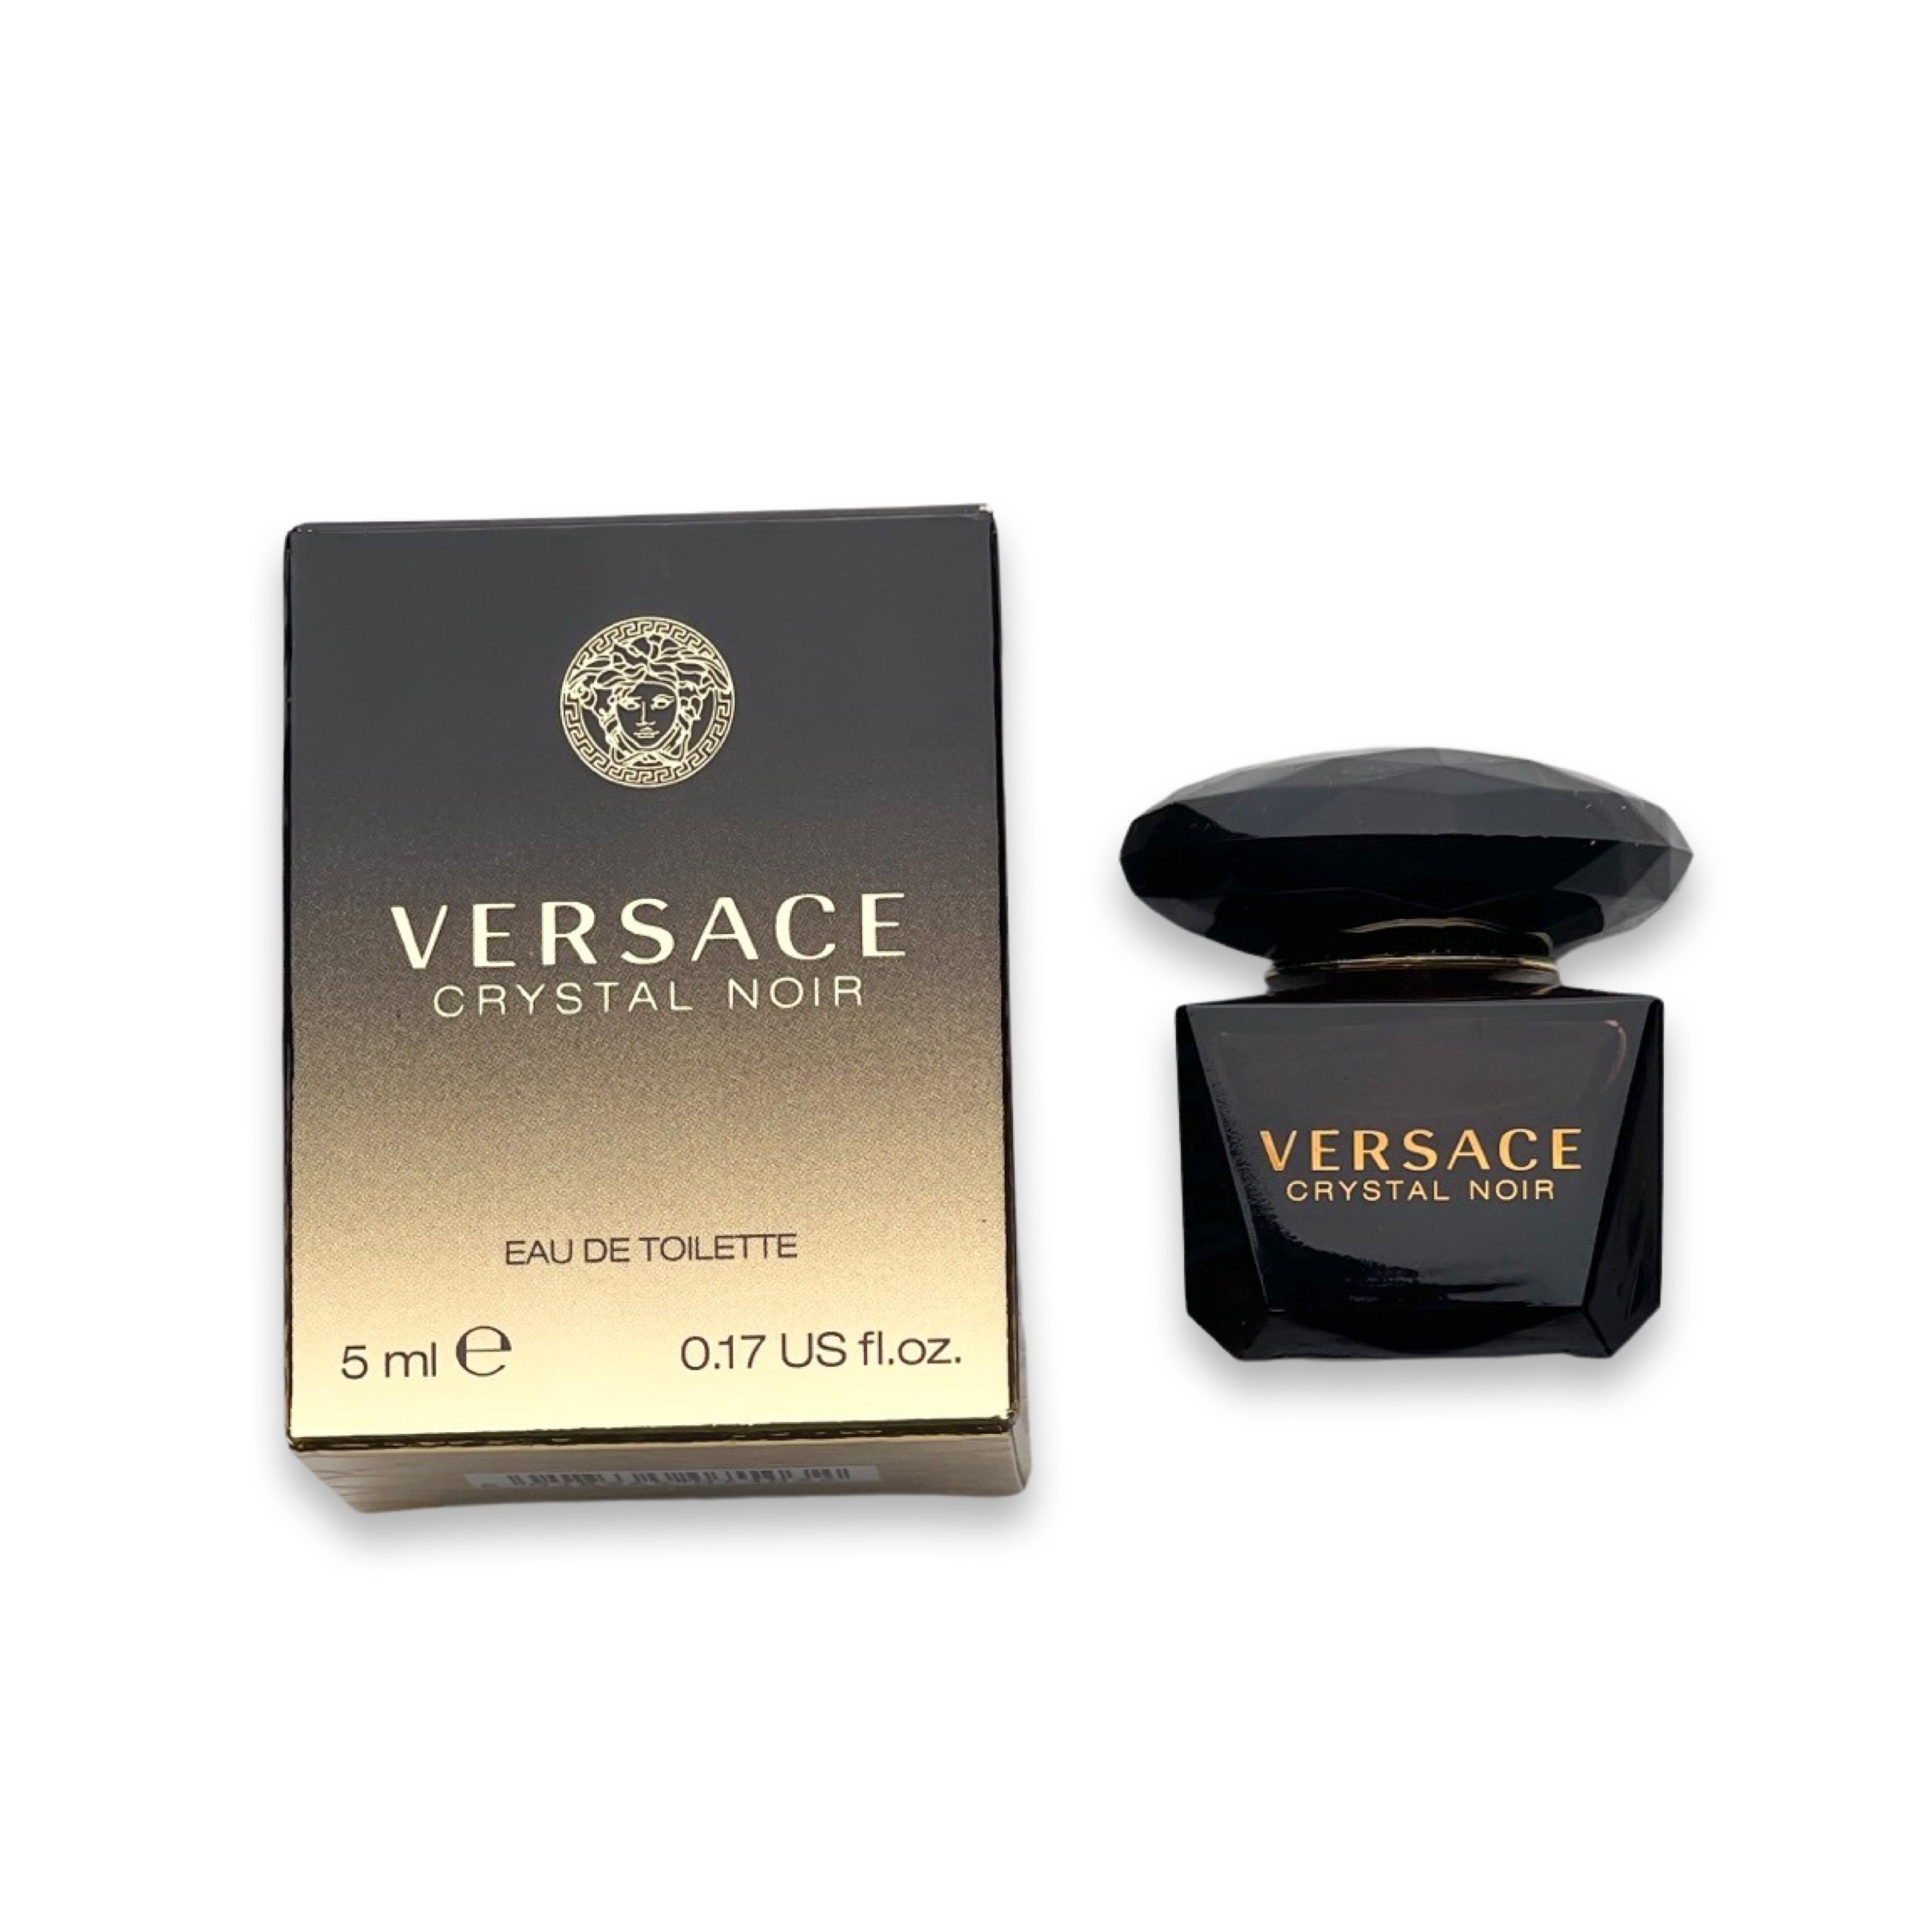 Versace Crystal Noir EDT New Patch / Travel Size (5ml)